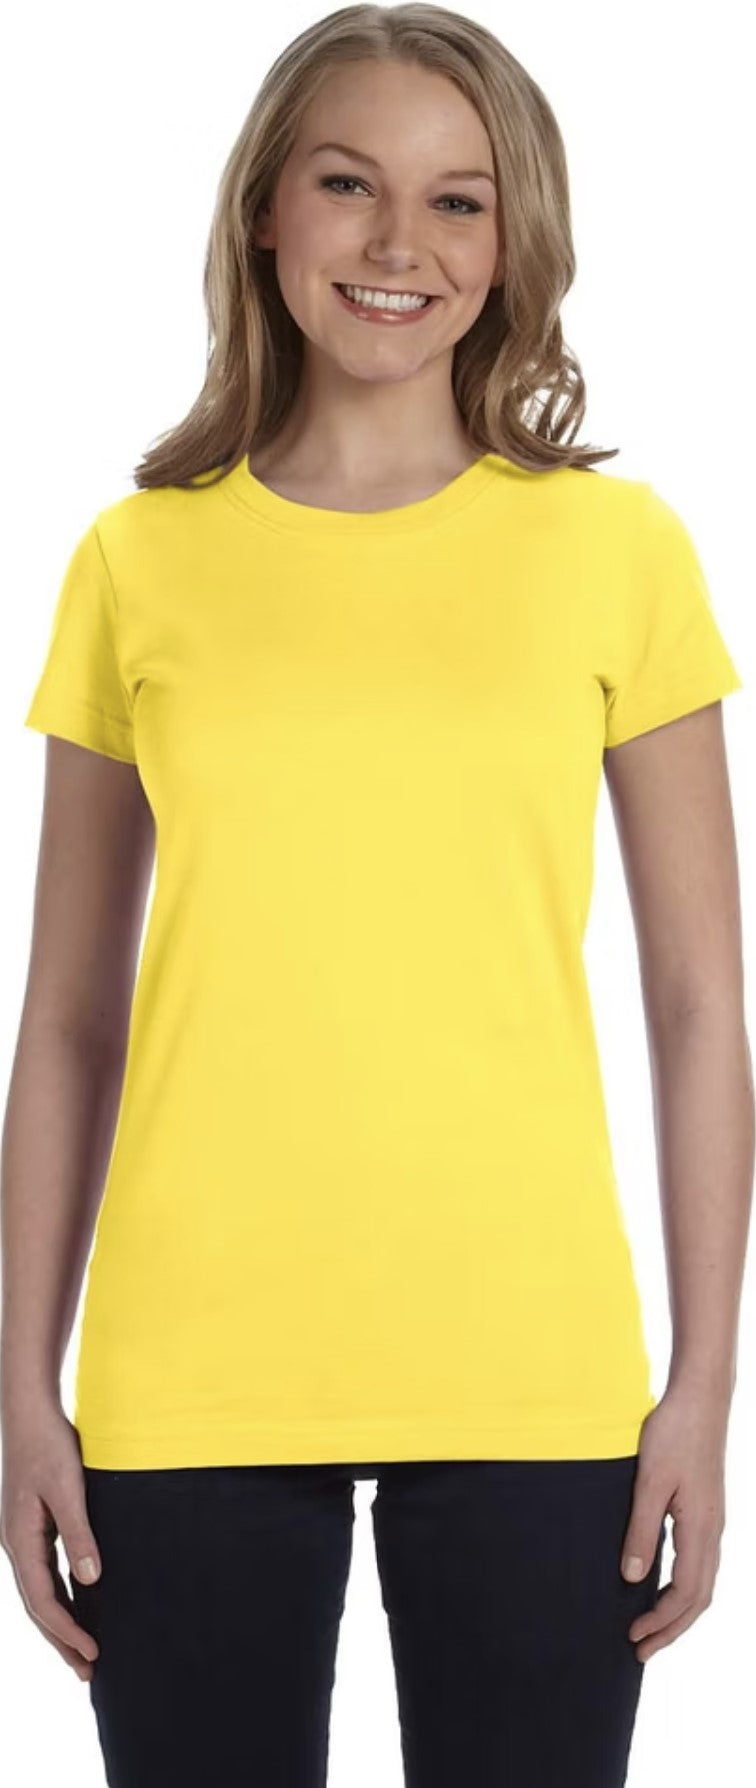 Ladies (Junior) Fitted - Crew Neck -- Fine Jersey T-shirt -- 100% Cotton -- Yellow Color